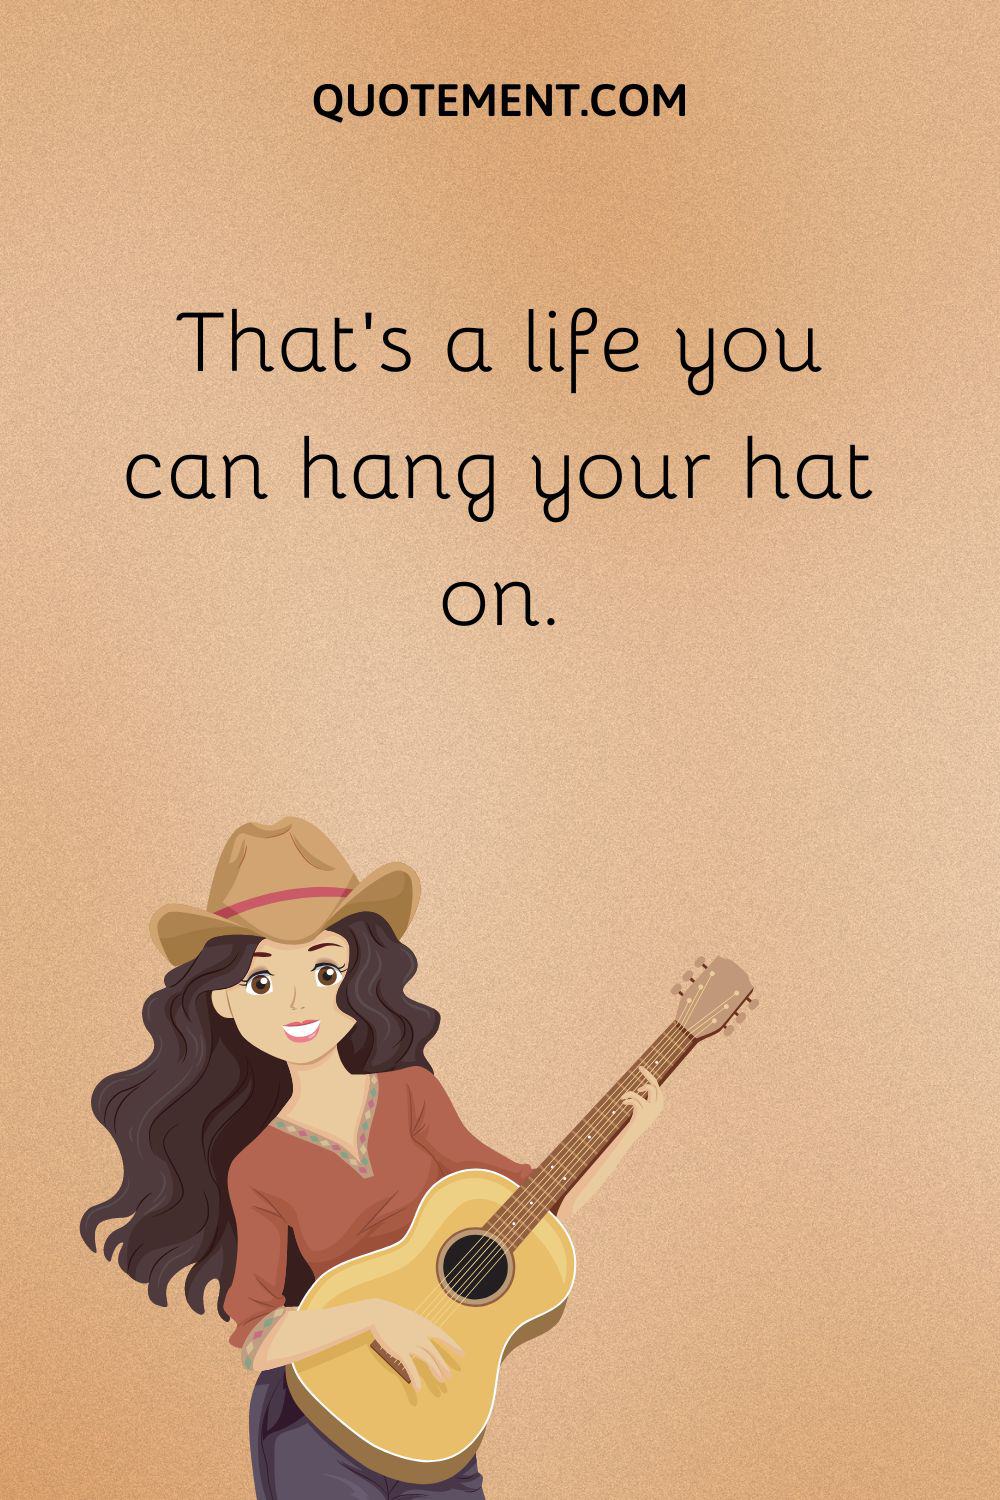 That’s a life you can hang your hat on